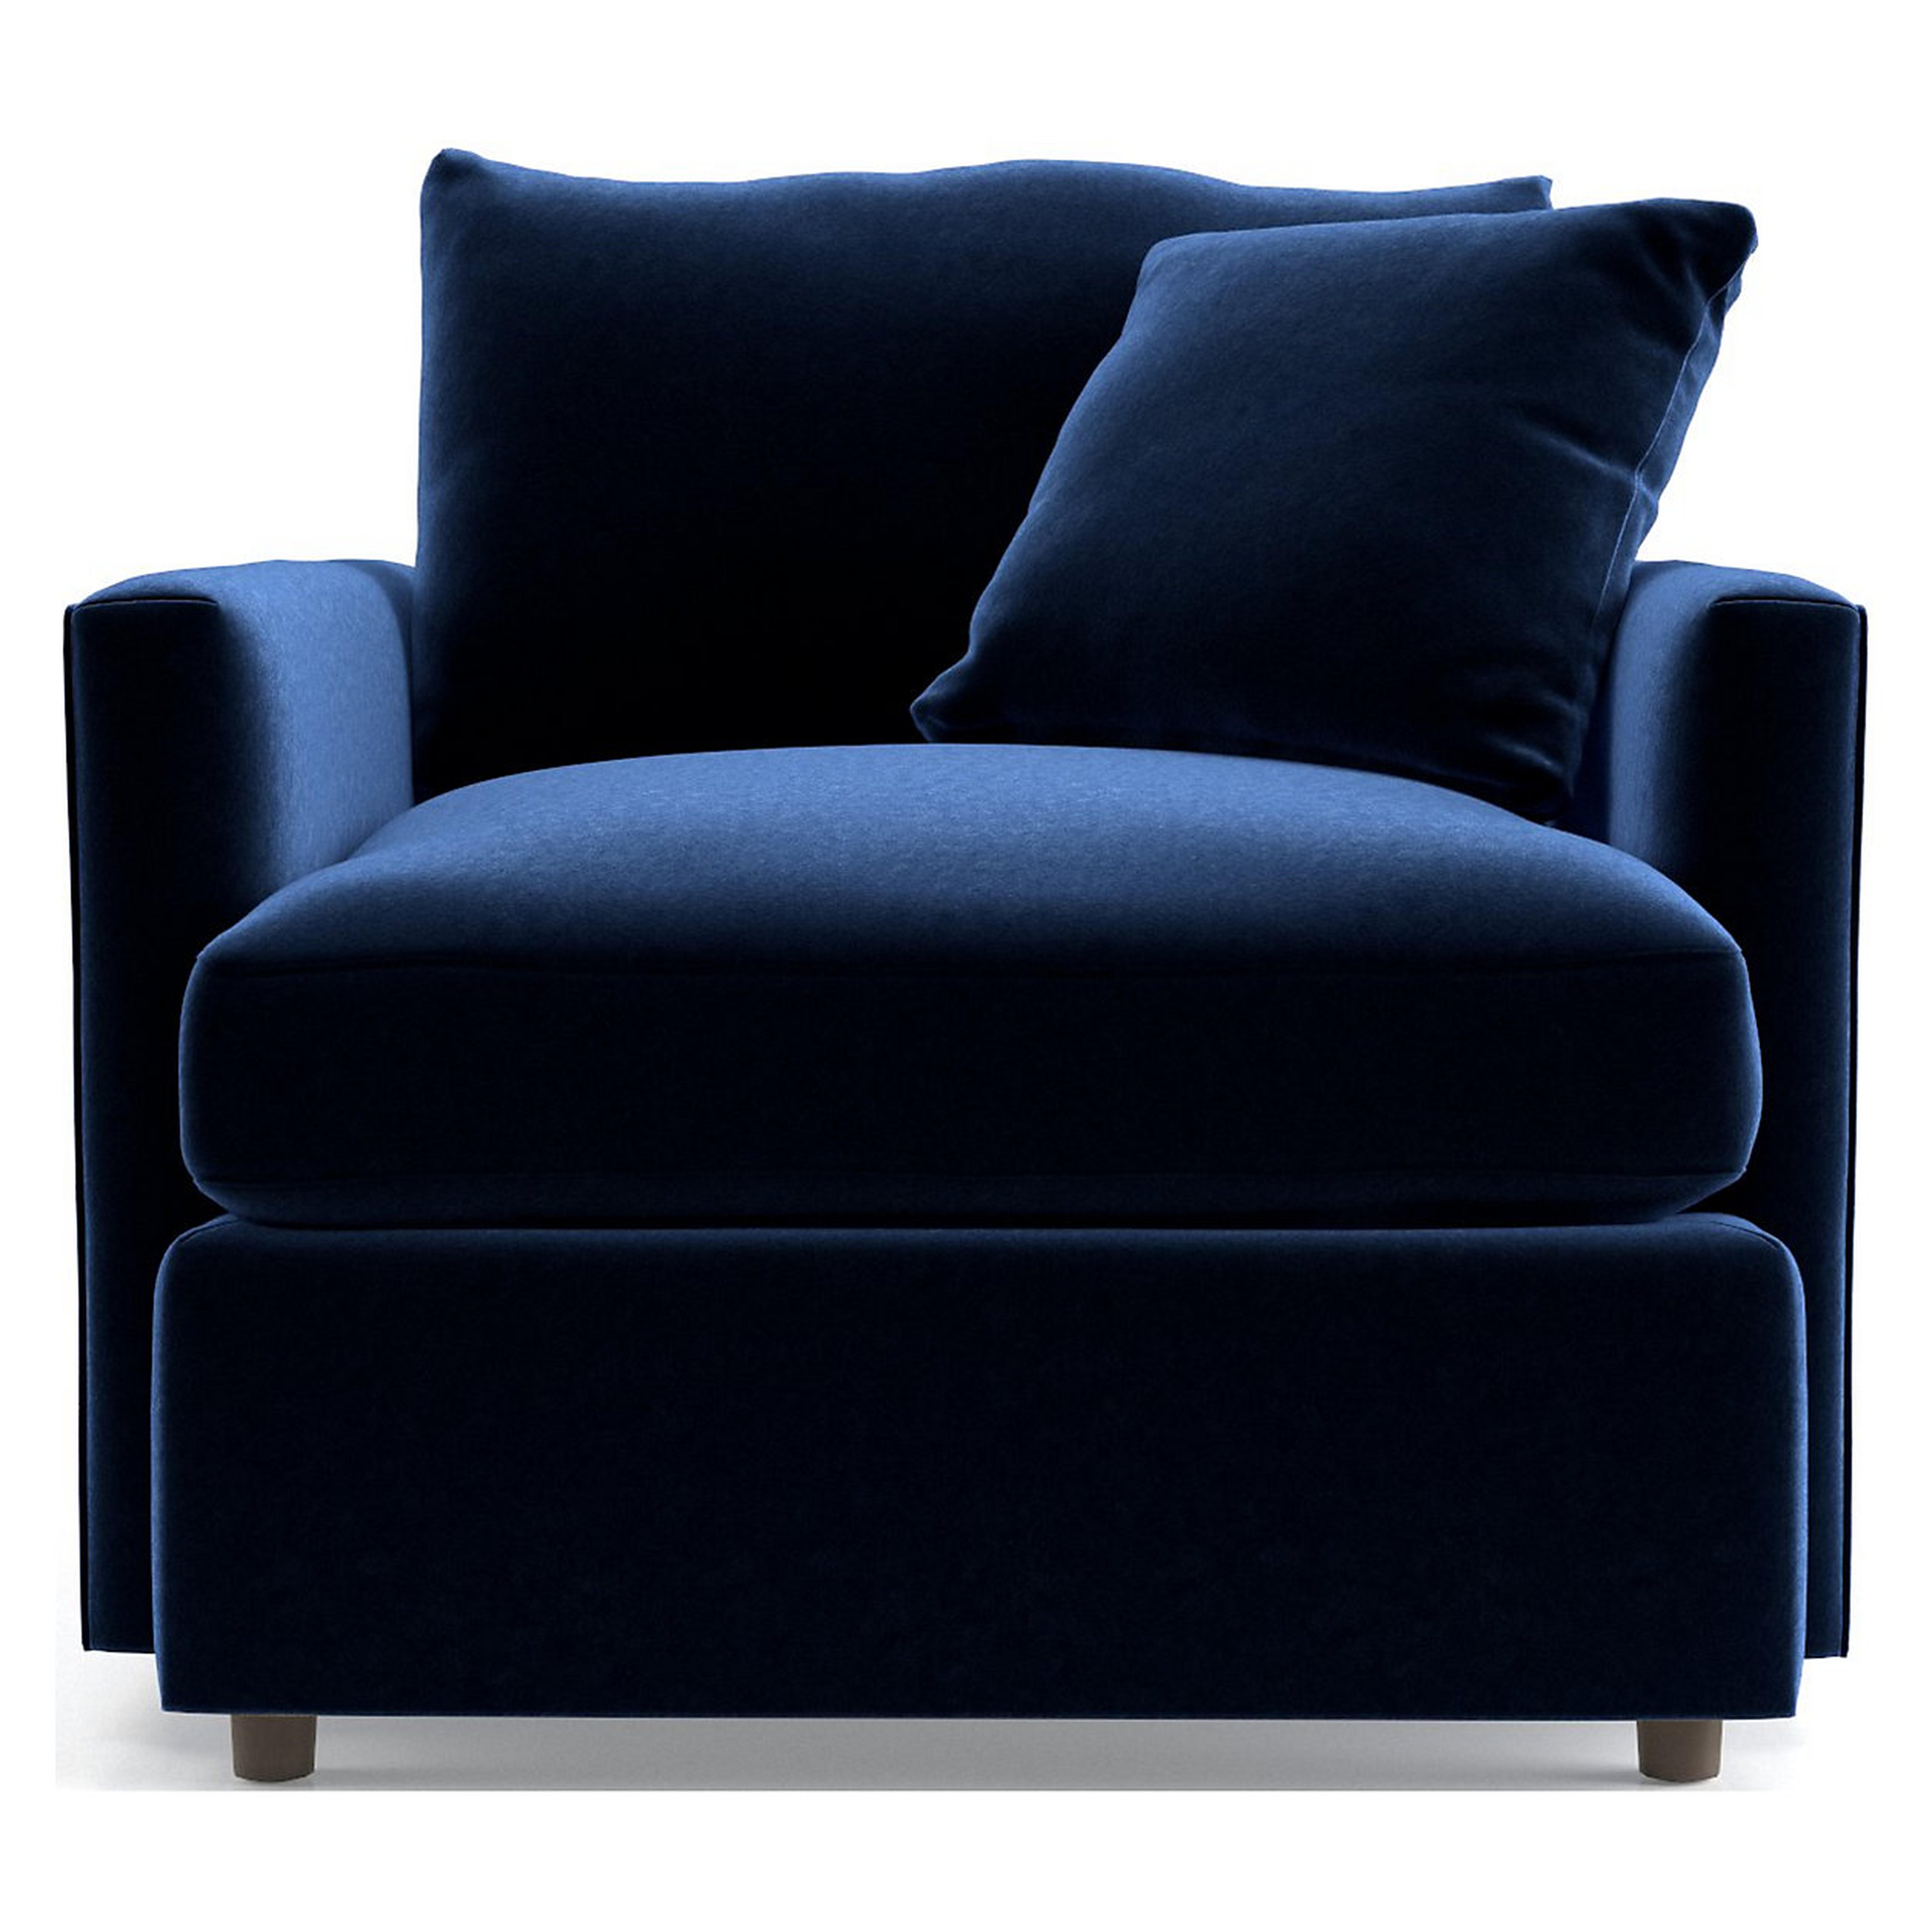 Lounge II Chair -Variety Indigo - Crate and Barrel